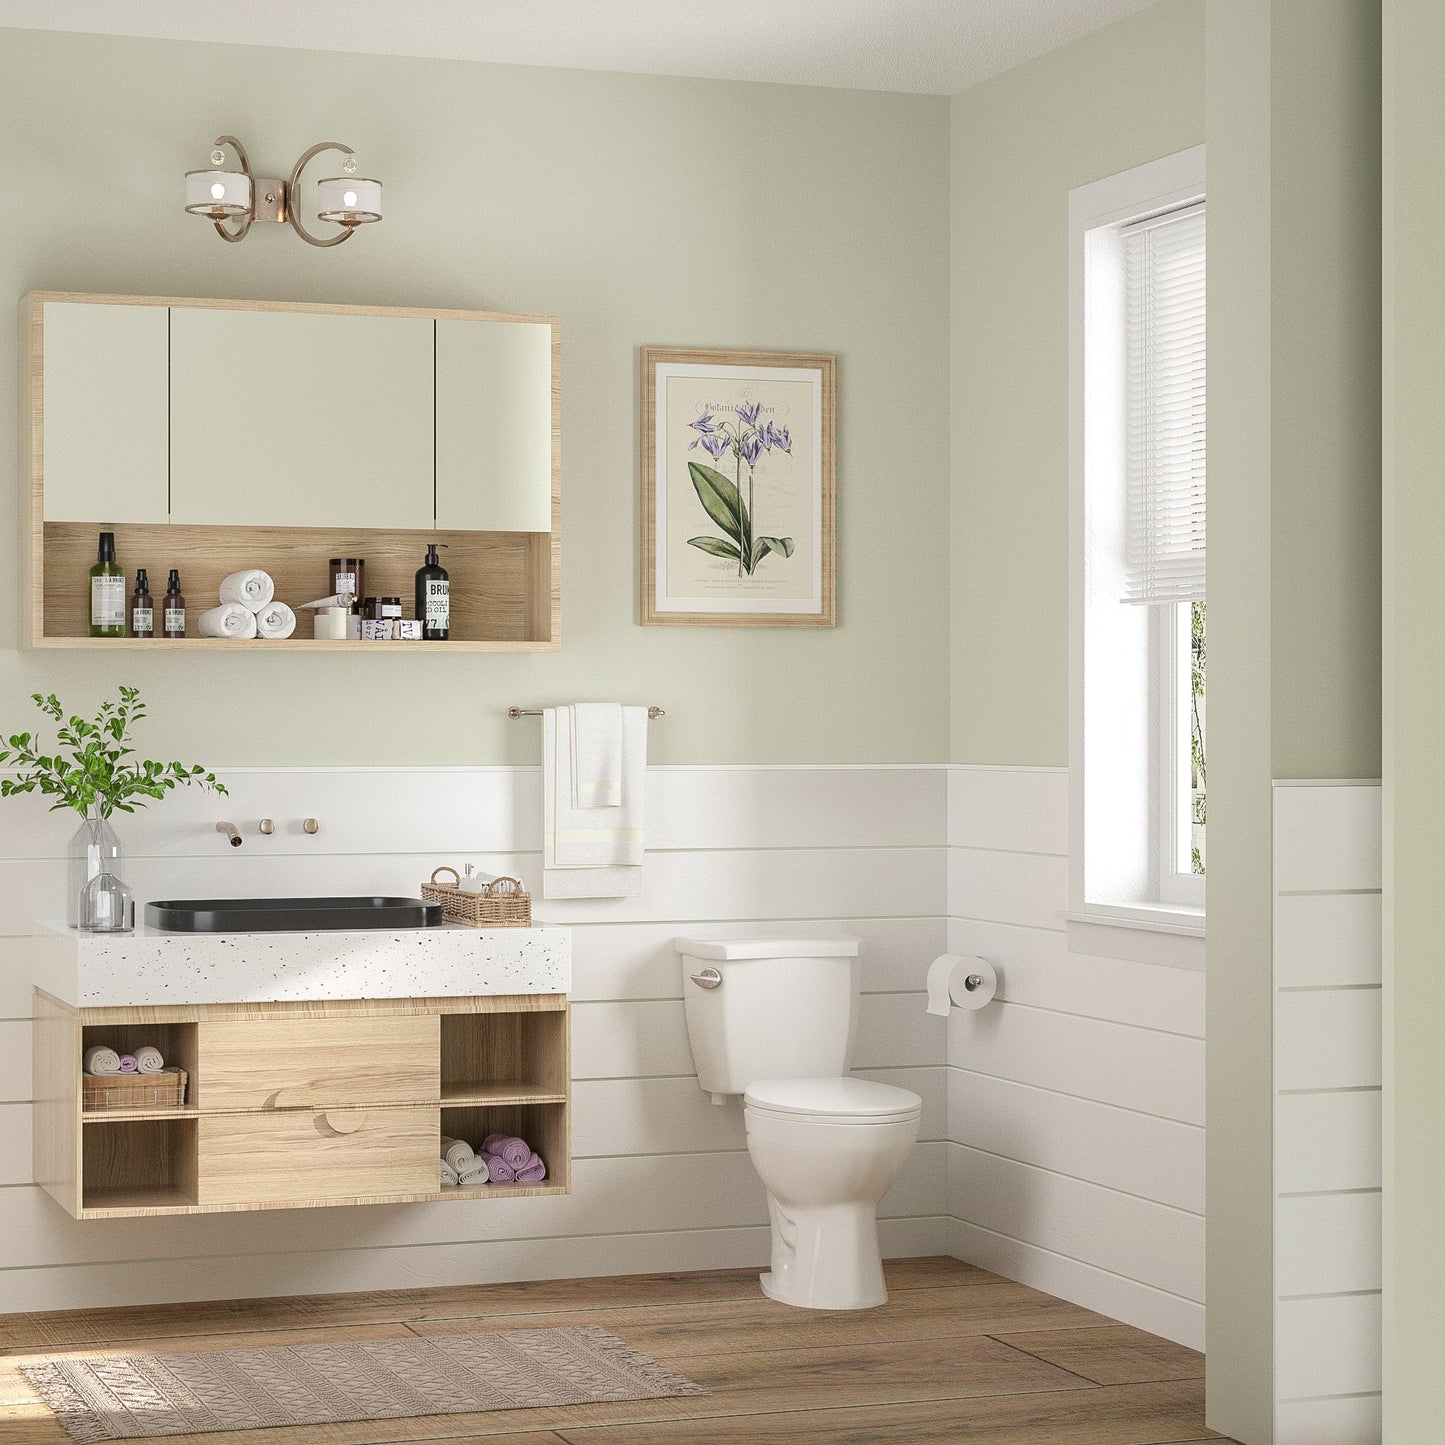 DeerValley Dynasty 1.28GPF Single-Flush Elongated White Two-Piece Toilet